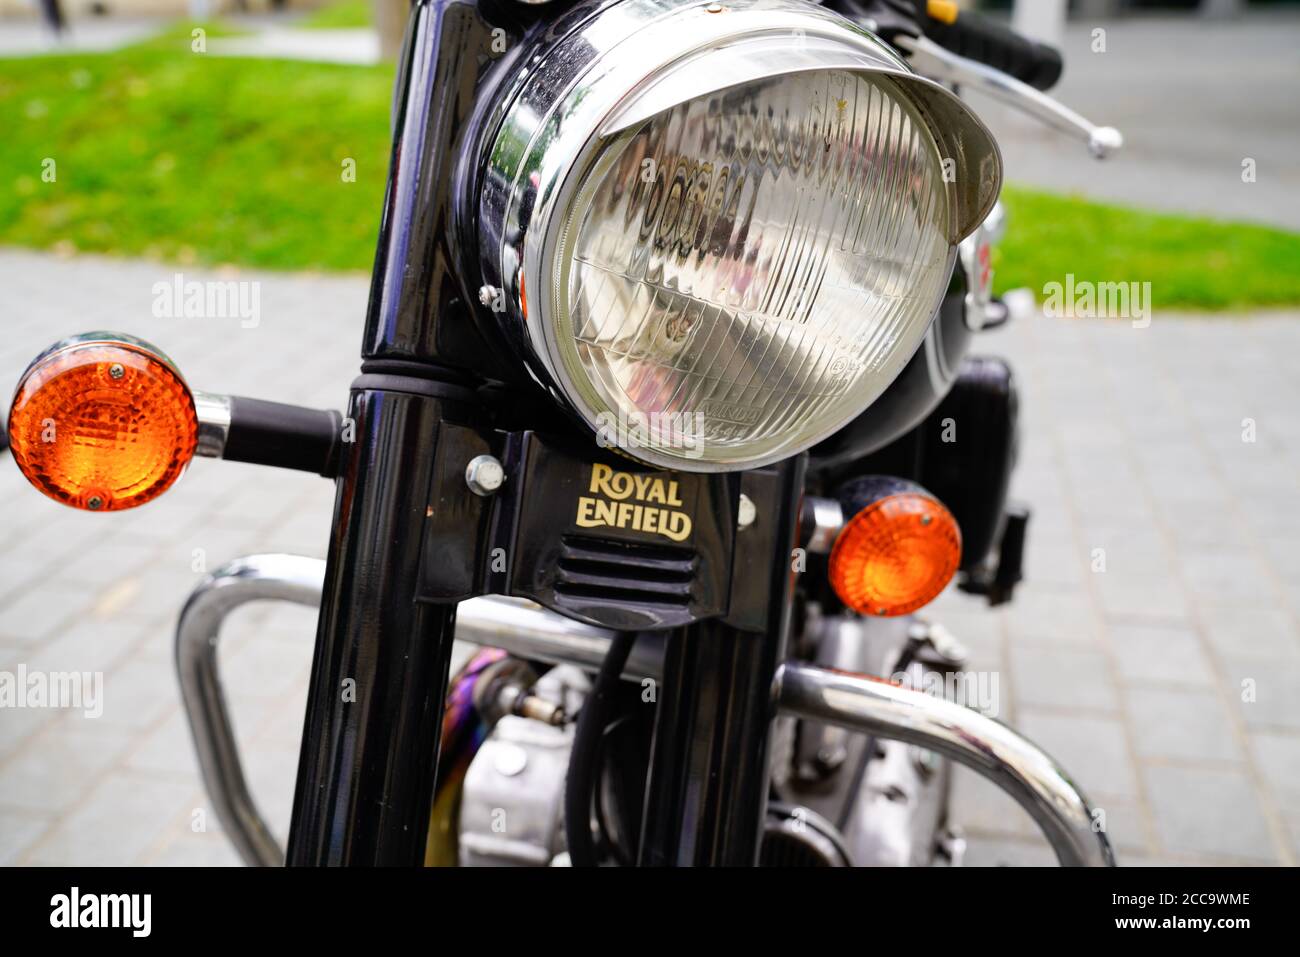 Bordeaux , Aquitaine / France - 08 16 2020 : Royal Enfield logo sign front of motorcycle closeup with headlight on classic indian motorcycle Stock Photo